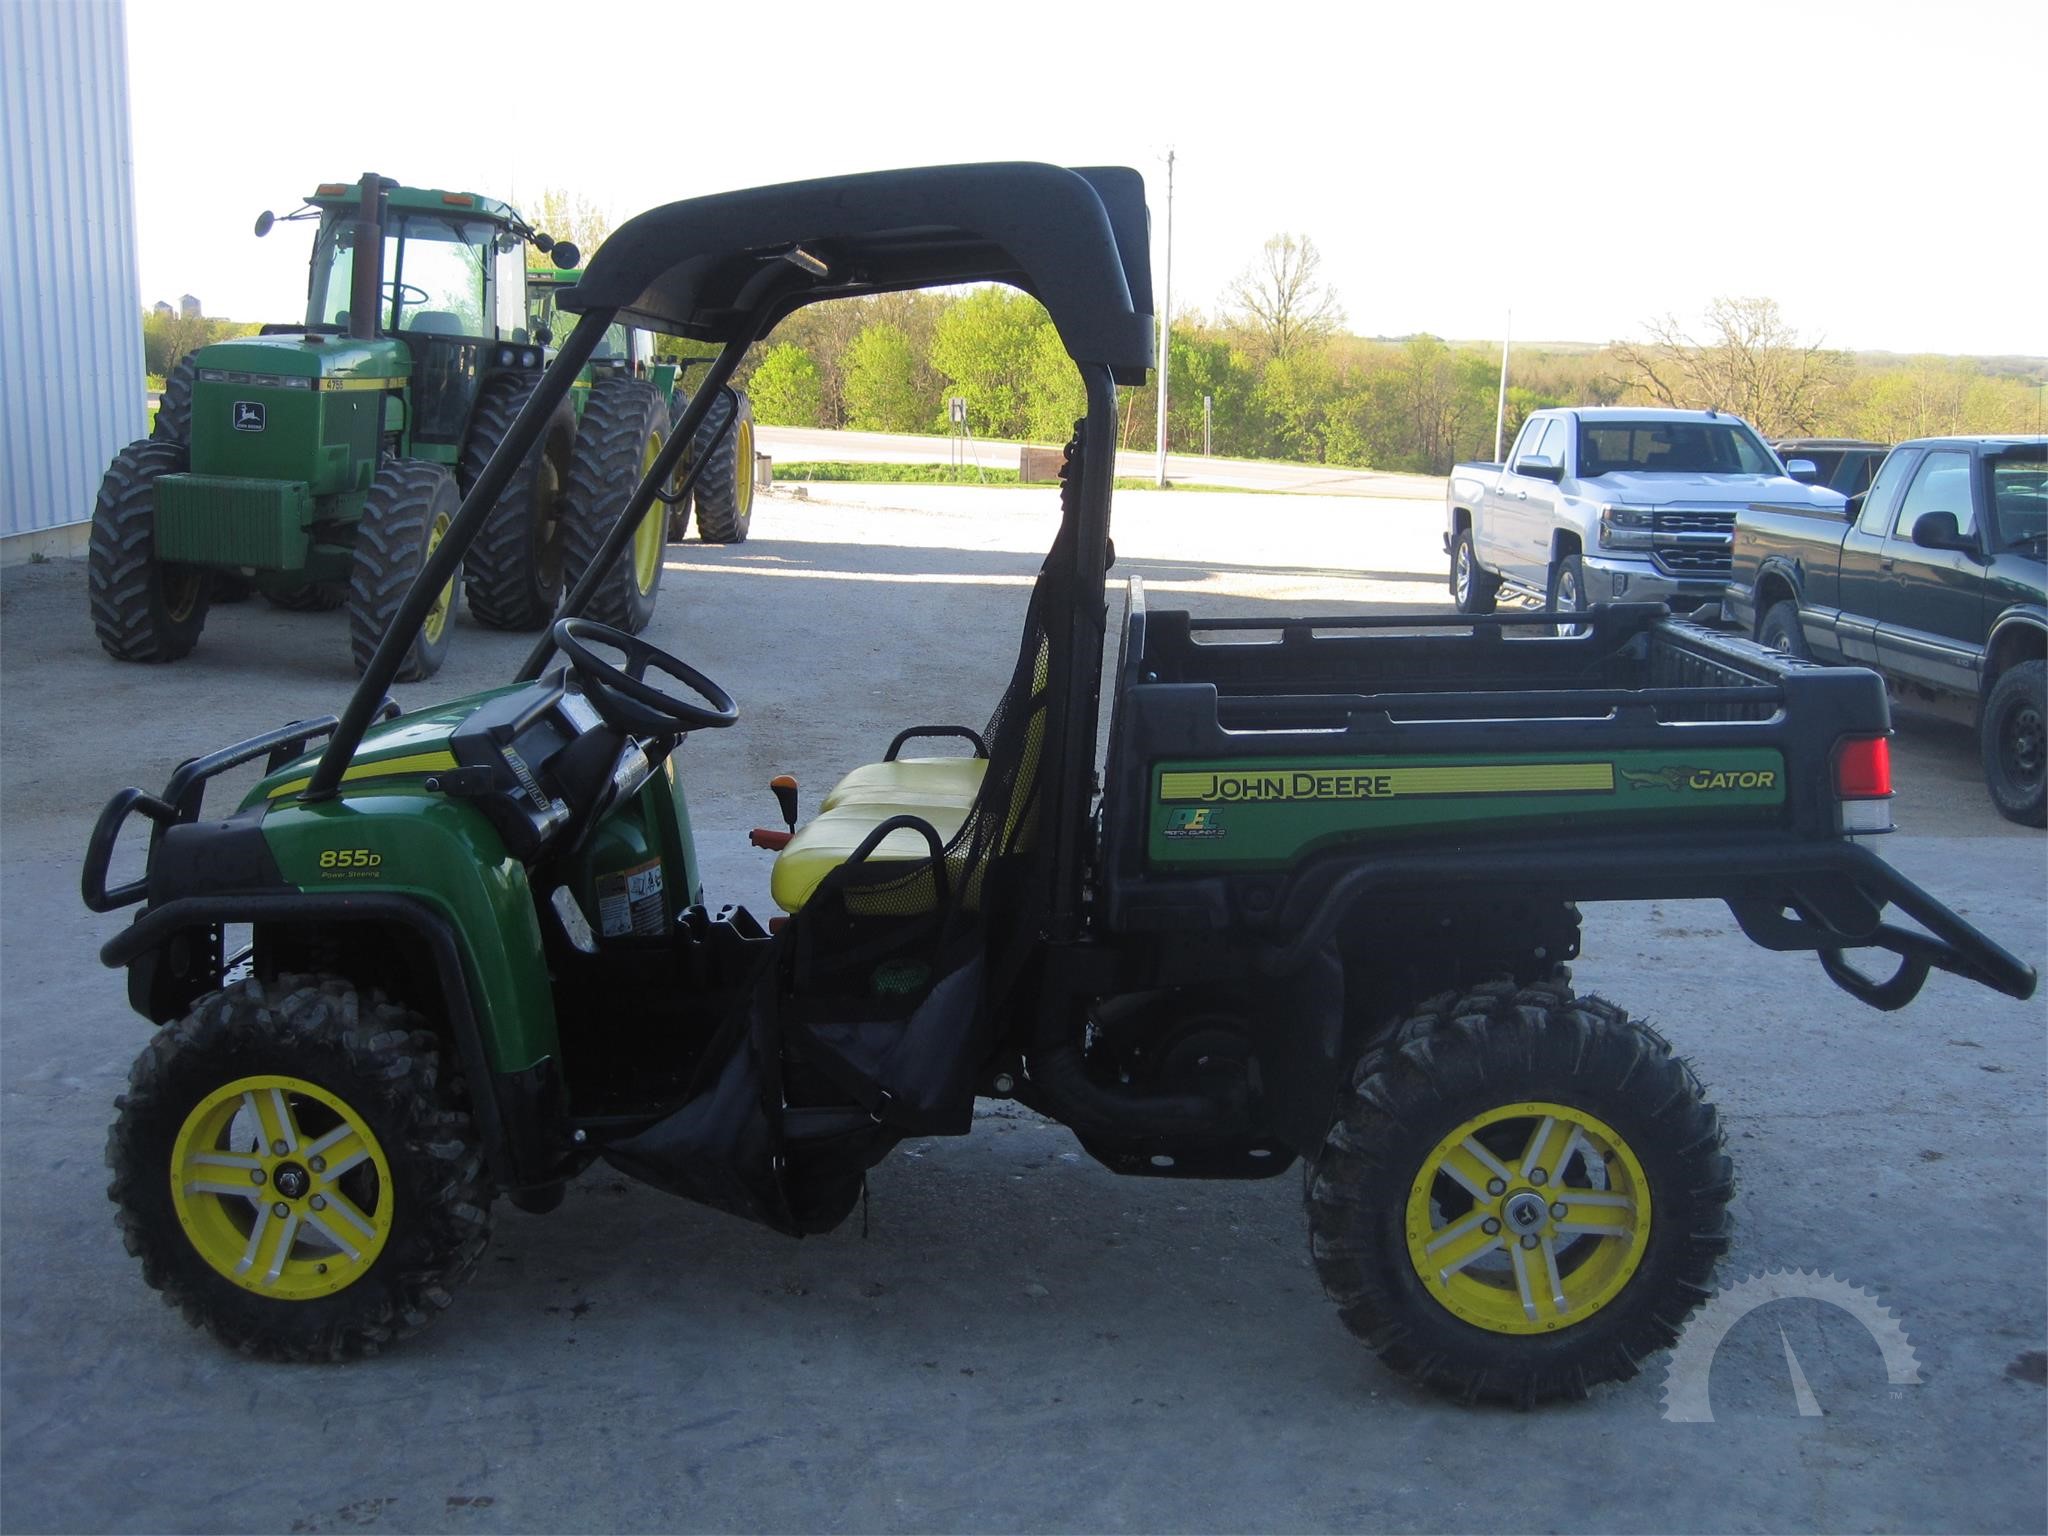 John Deere Gator Xuv 855d Auction Results 26 Listings Auctiontime Com Page 1 Of 2